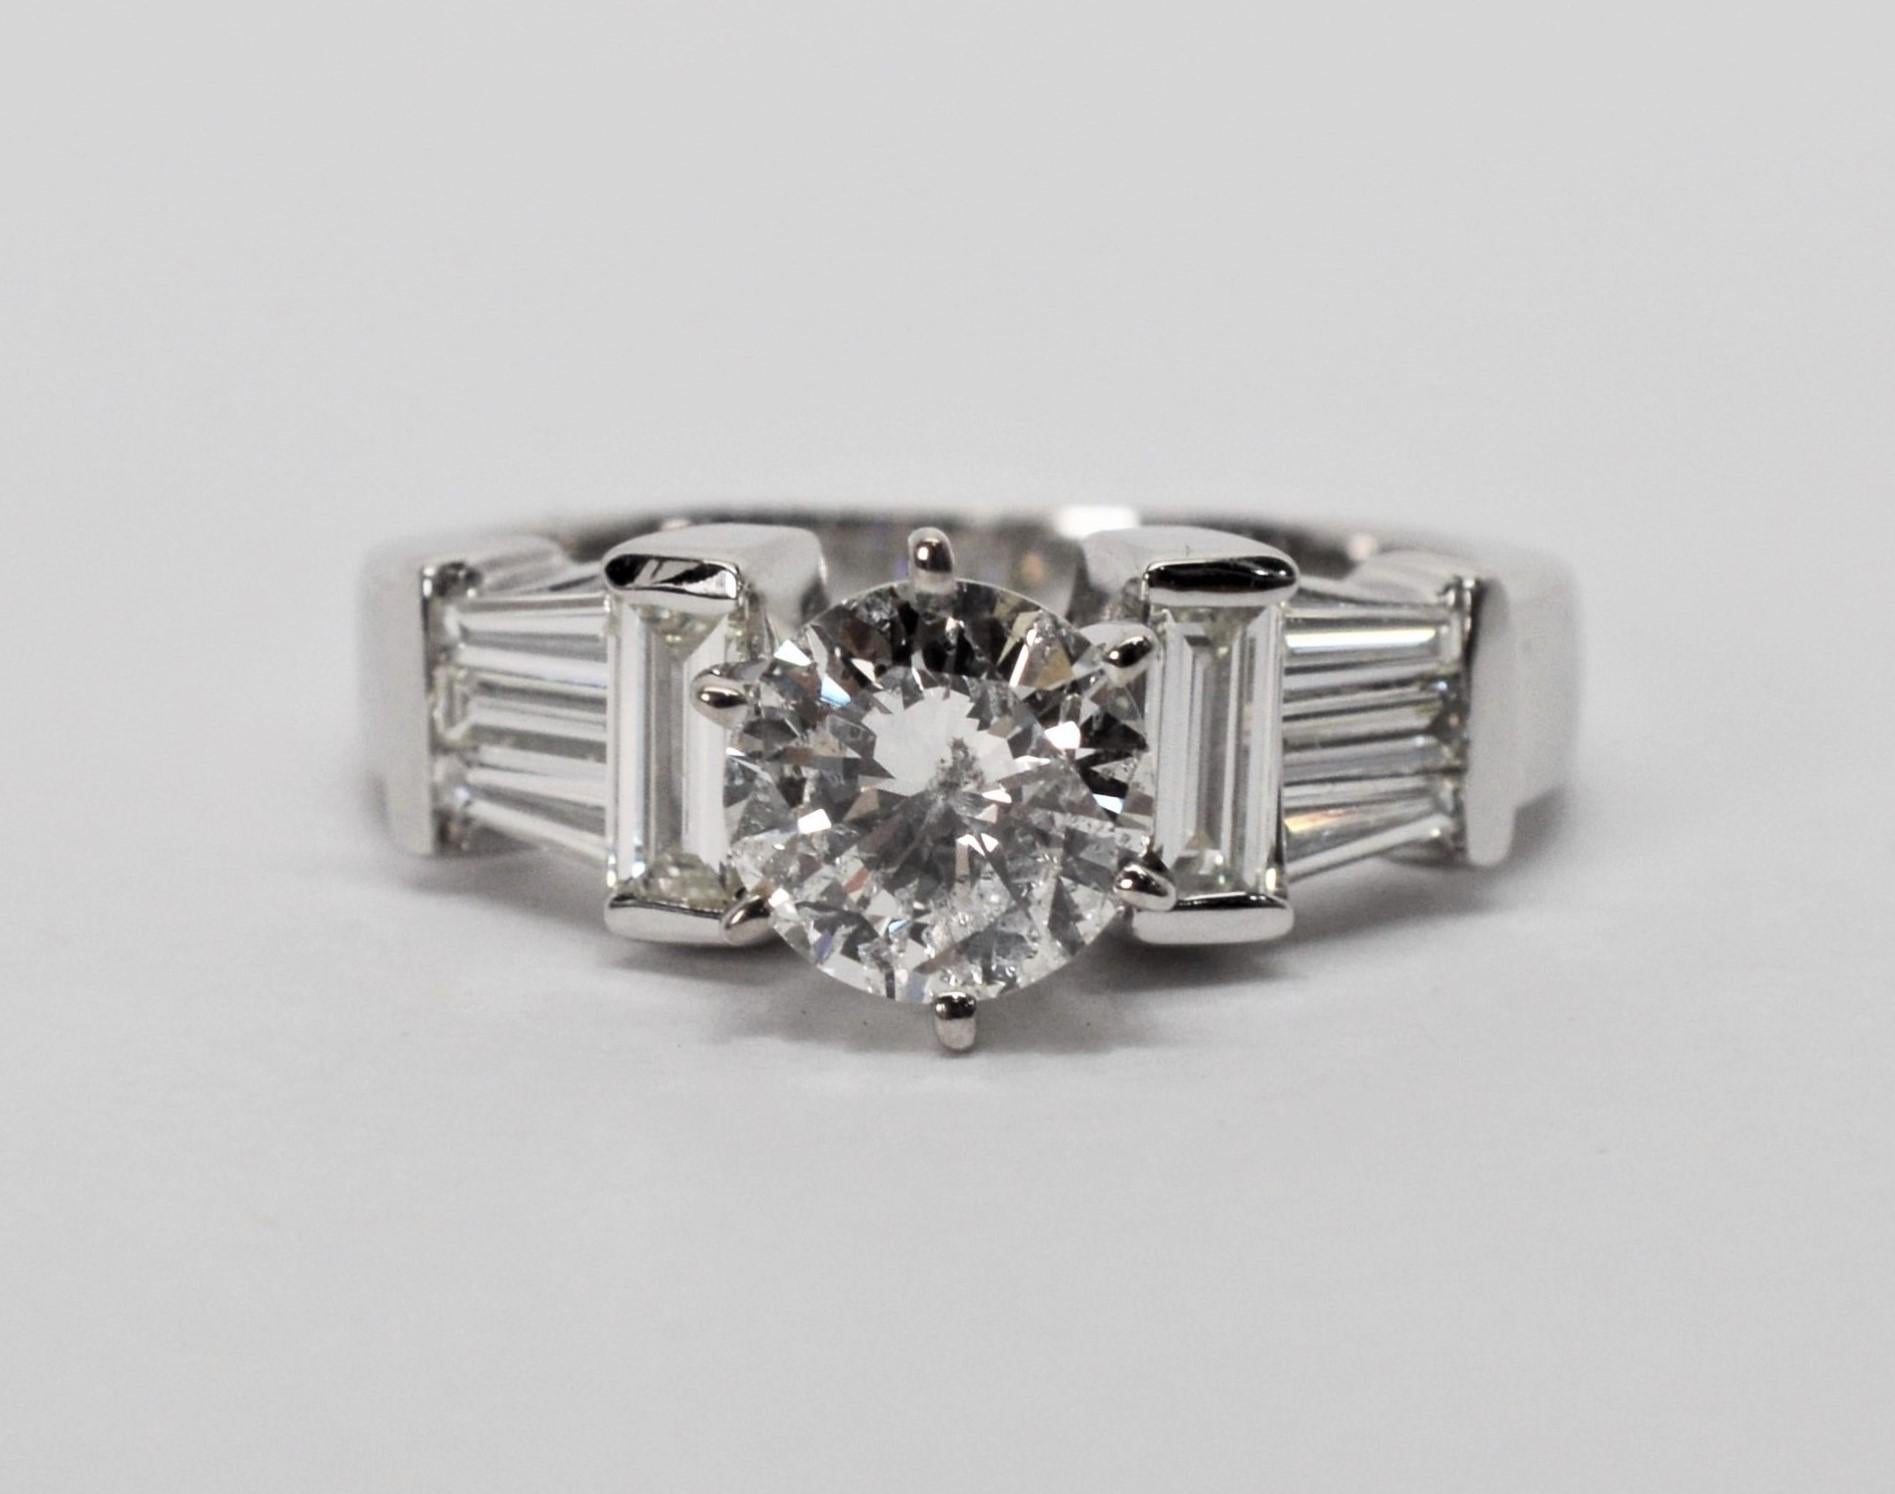 1.2 Carat Diamond White Gold Engagement Ring In Good Condition For Sale In Mount Kisco, NY